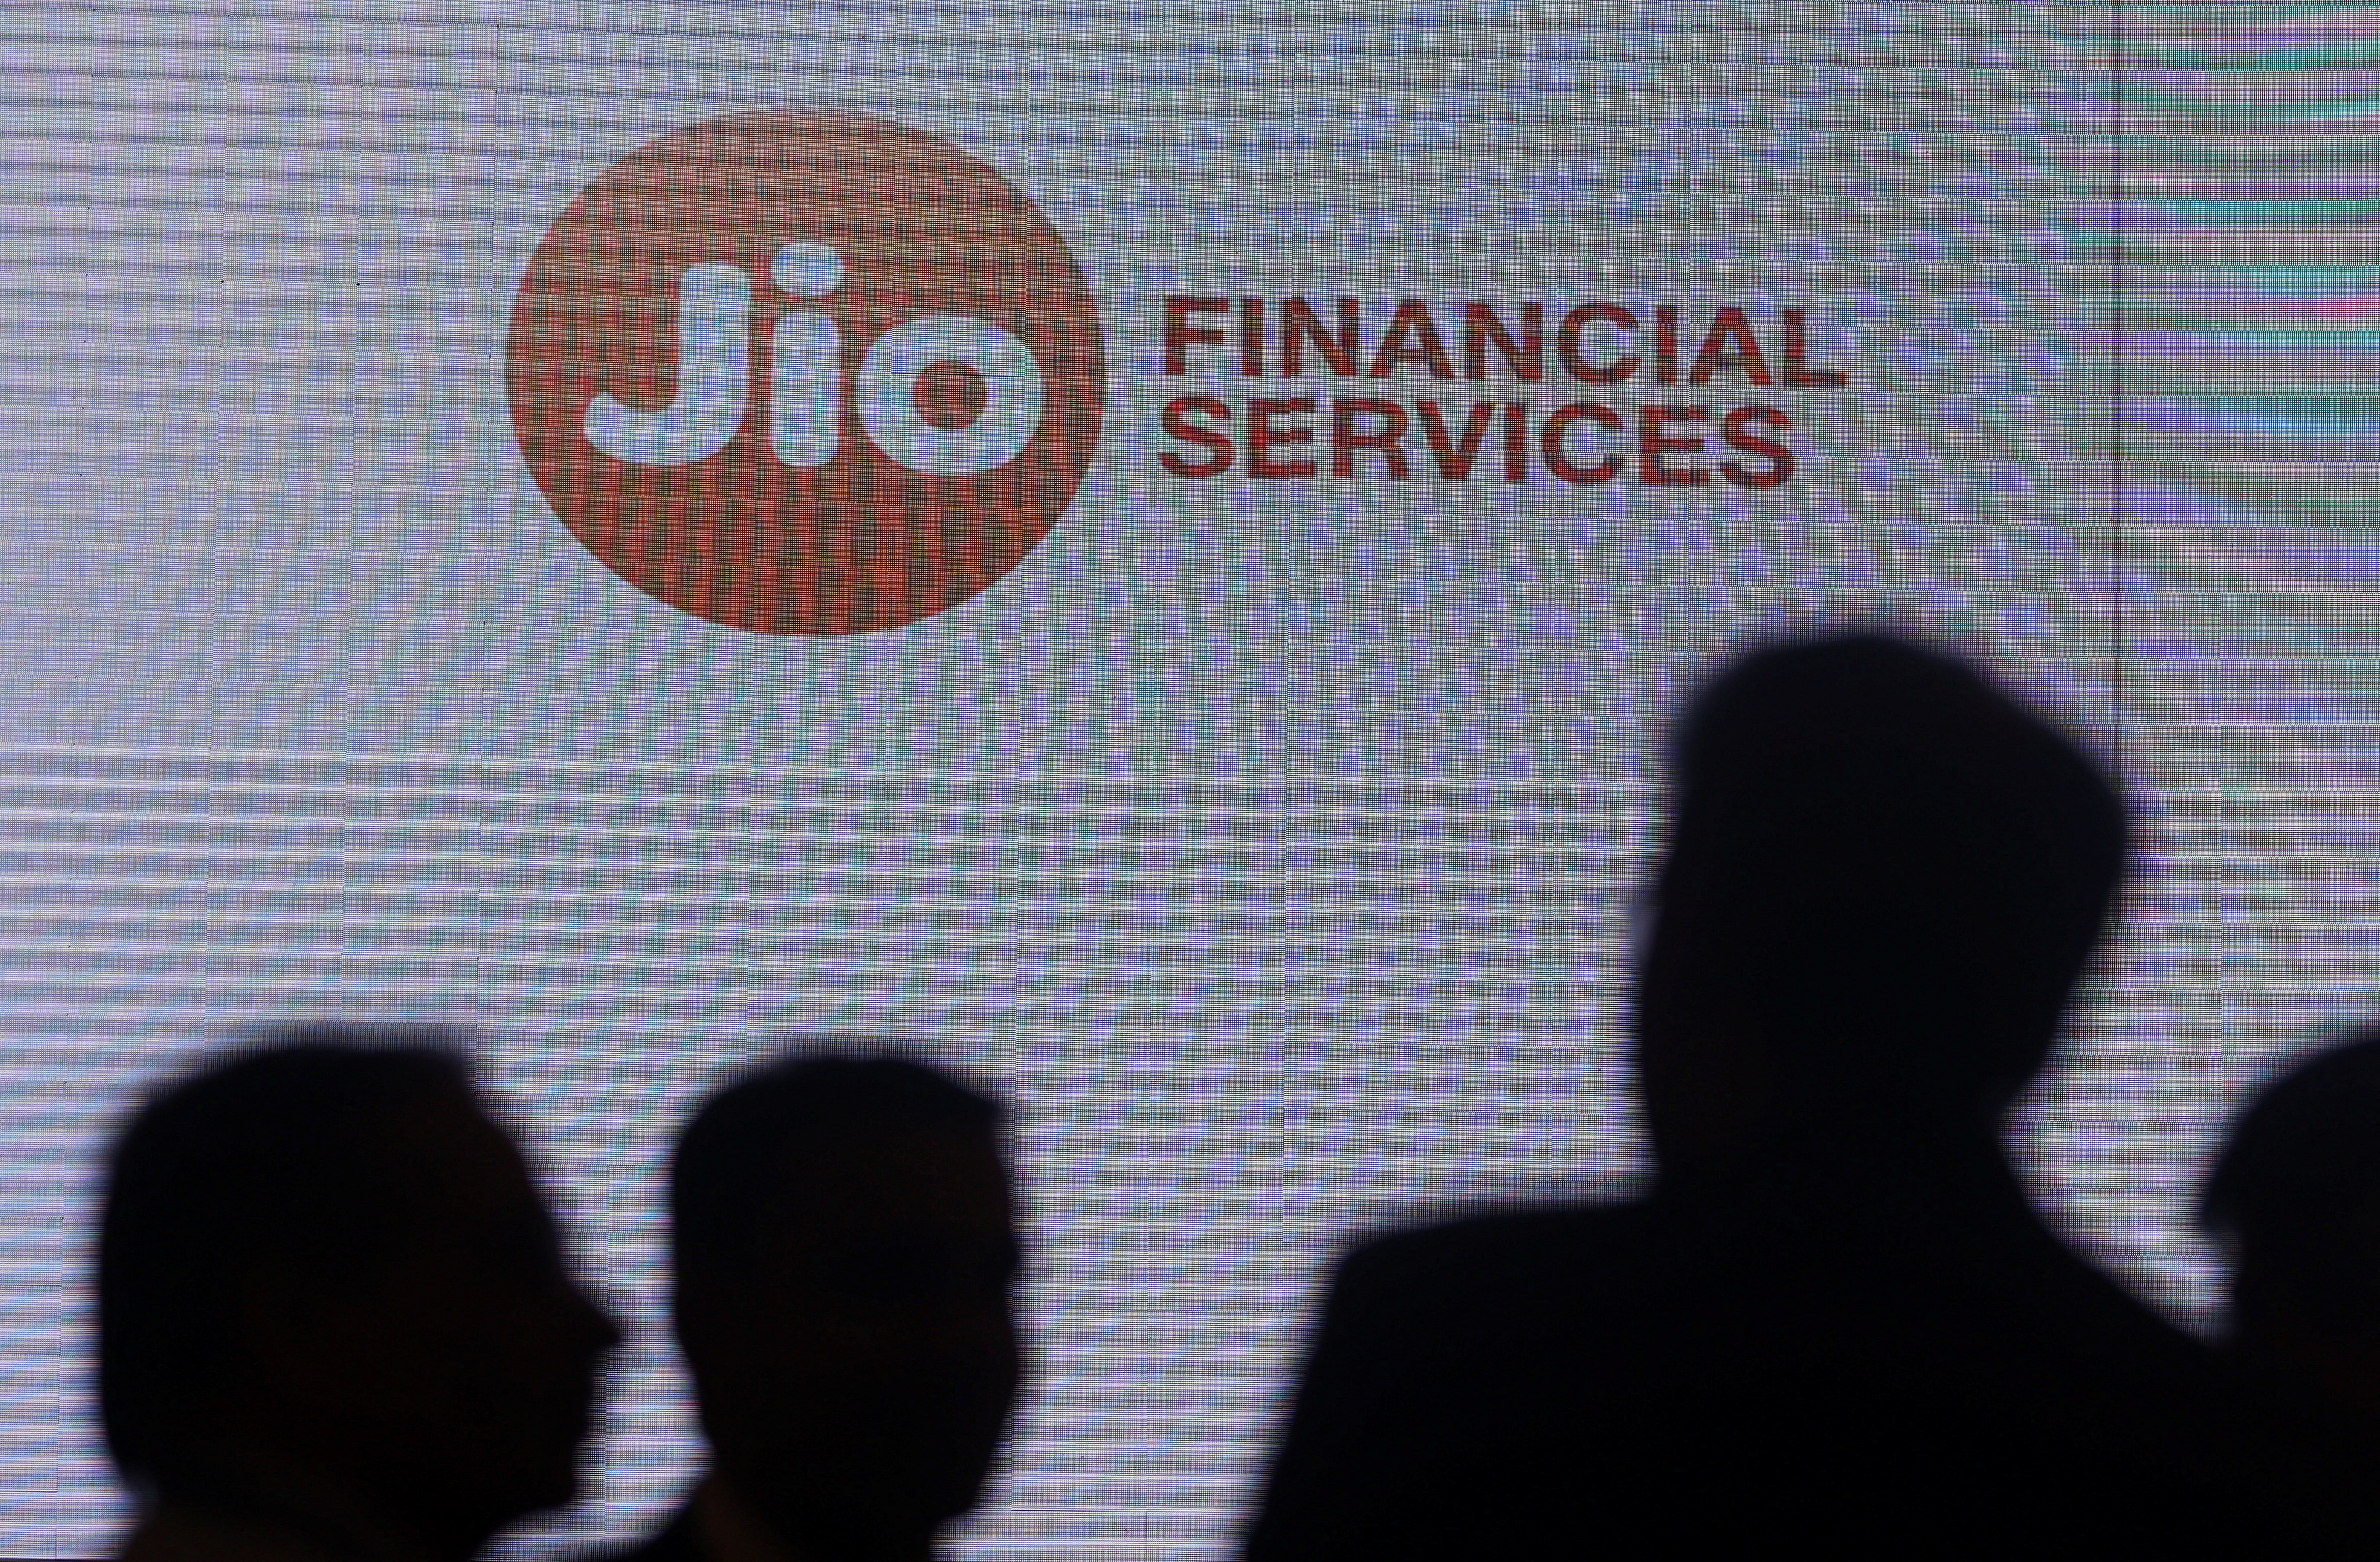 India’s Jio Financial Services in talks for maiden bond issue – bankers